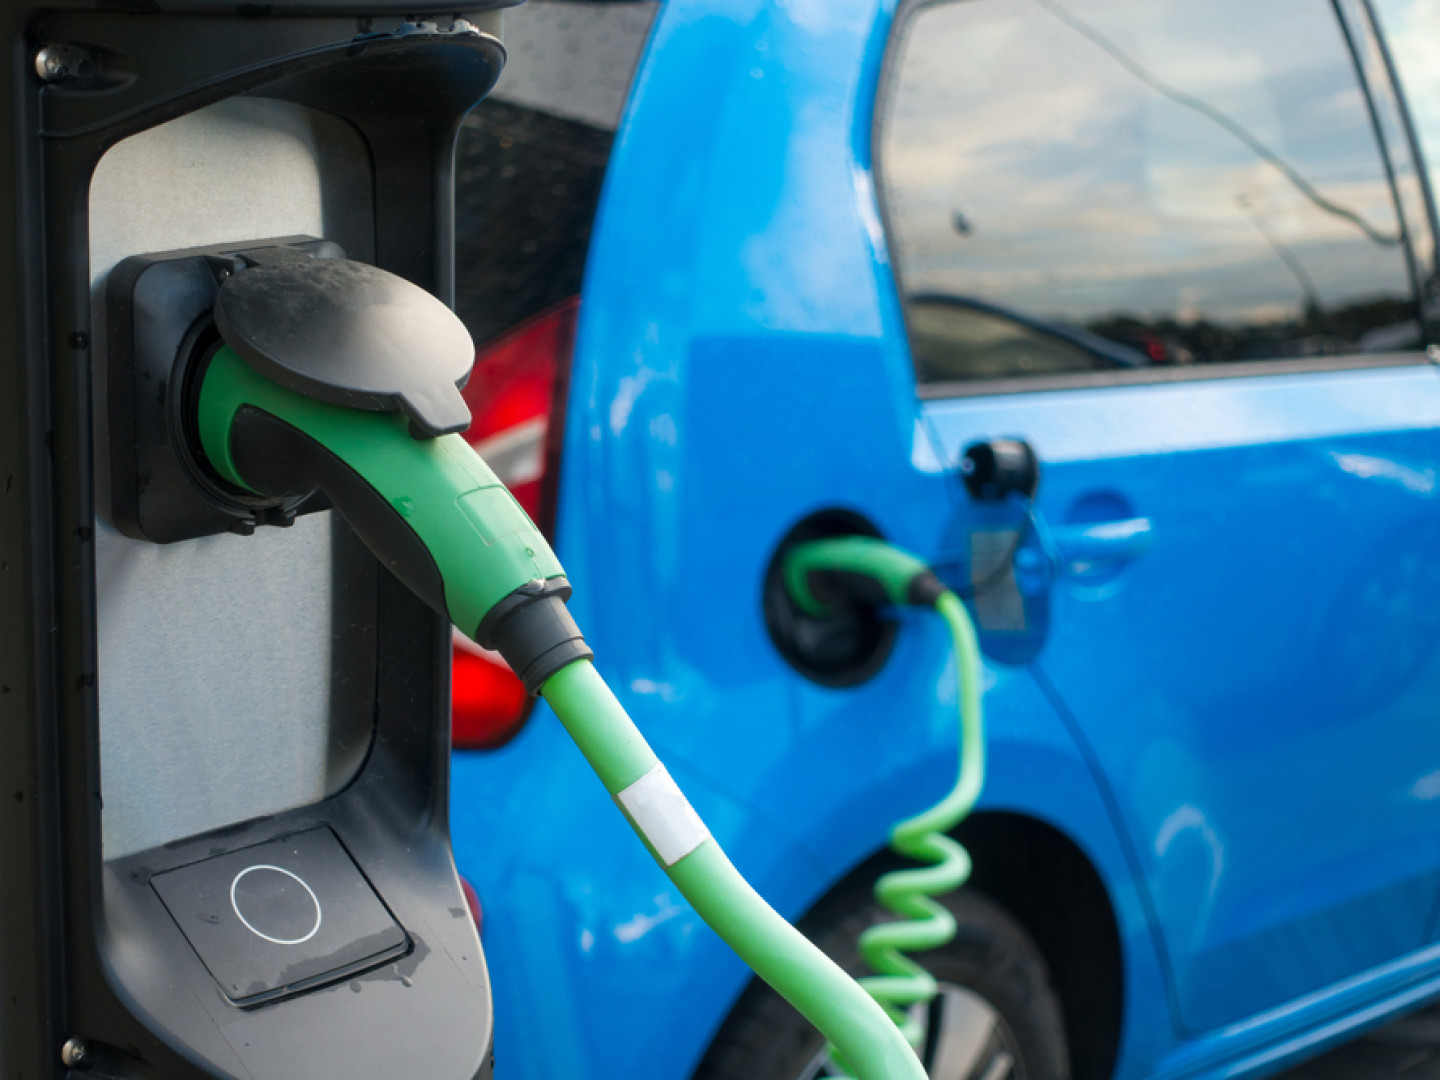 EV charger installation - Can Anyone Install an EV Charging Port? - Electric Car Home Charging Station - Boulder Commercial EV Installation